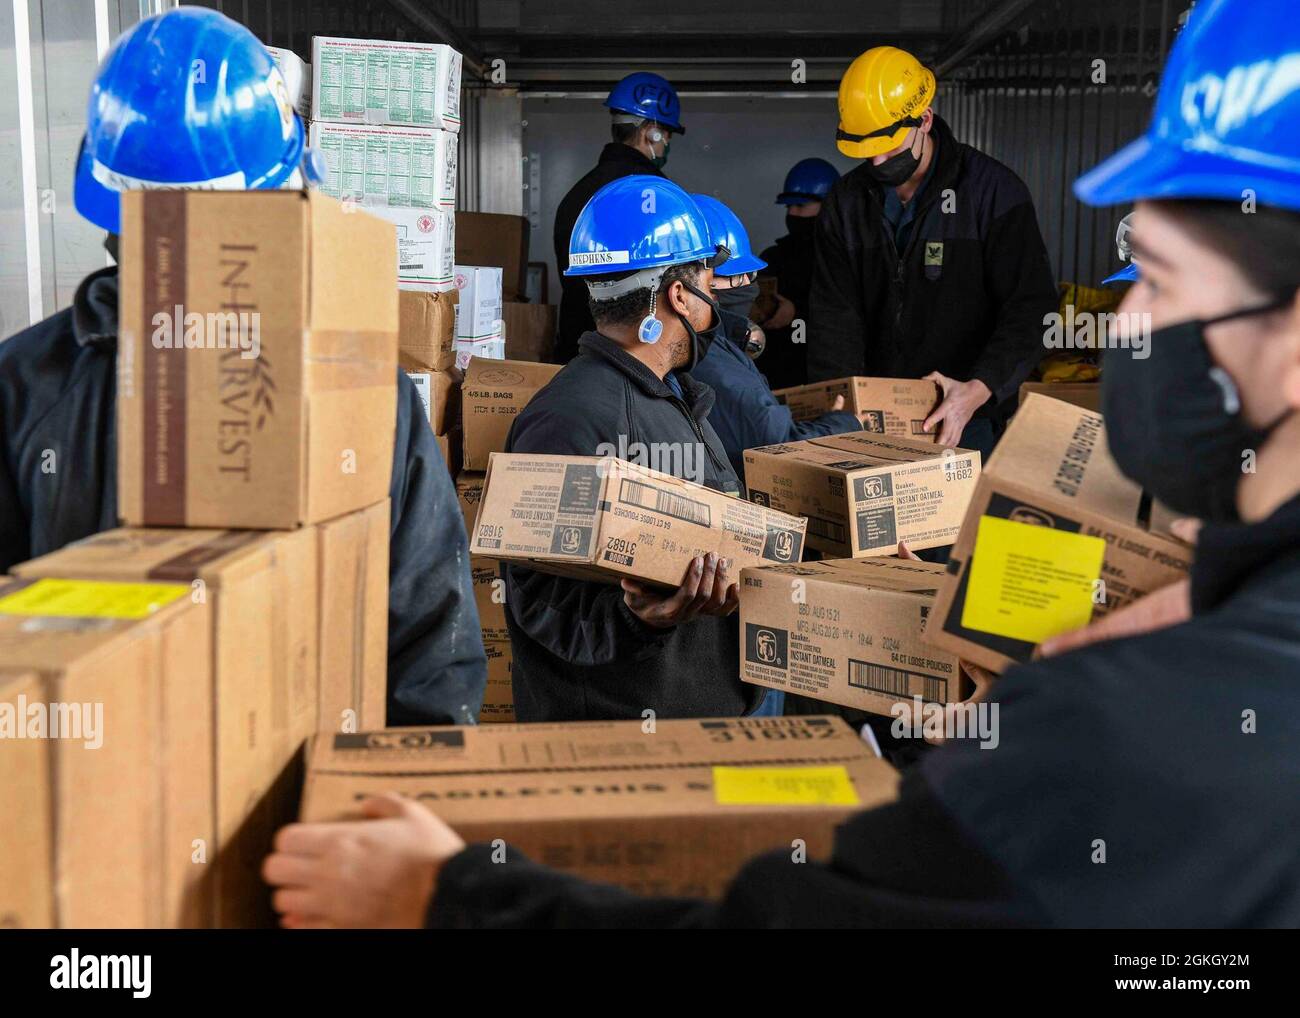 RIJEKA, Croatia (Apr. 19, 2021) Sailors place stores in a refrigerated storage unit aboard the Expeditionary Sea Base USS Hershel “Woody” Williams (ESB 4) in Rijeka, Croatia, Apr. 19, 2021. Hershel “Woody” Williams is on a scheduled deployment in the U.S. Sixth Fleet area of operations in support of U.S. national interests and security in Europe and Africa. Stock Photo